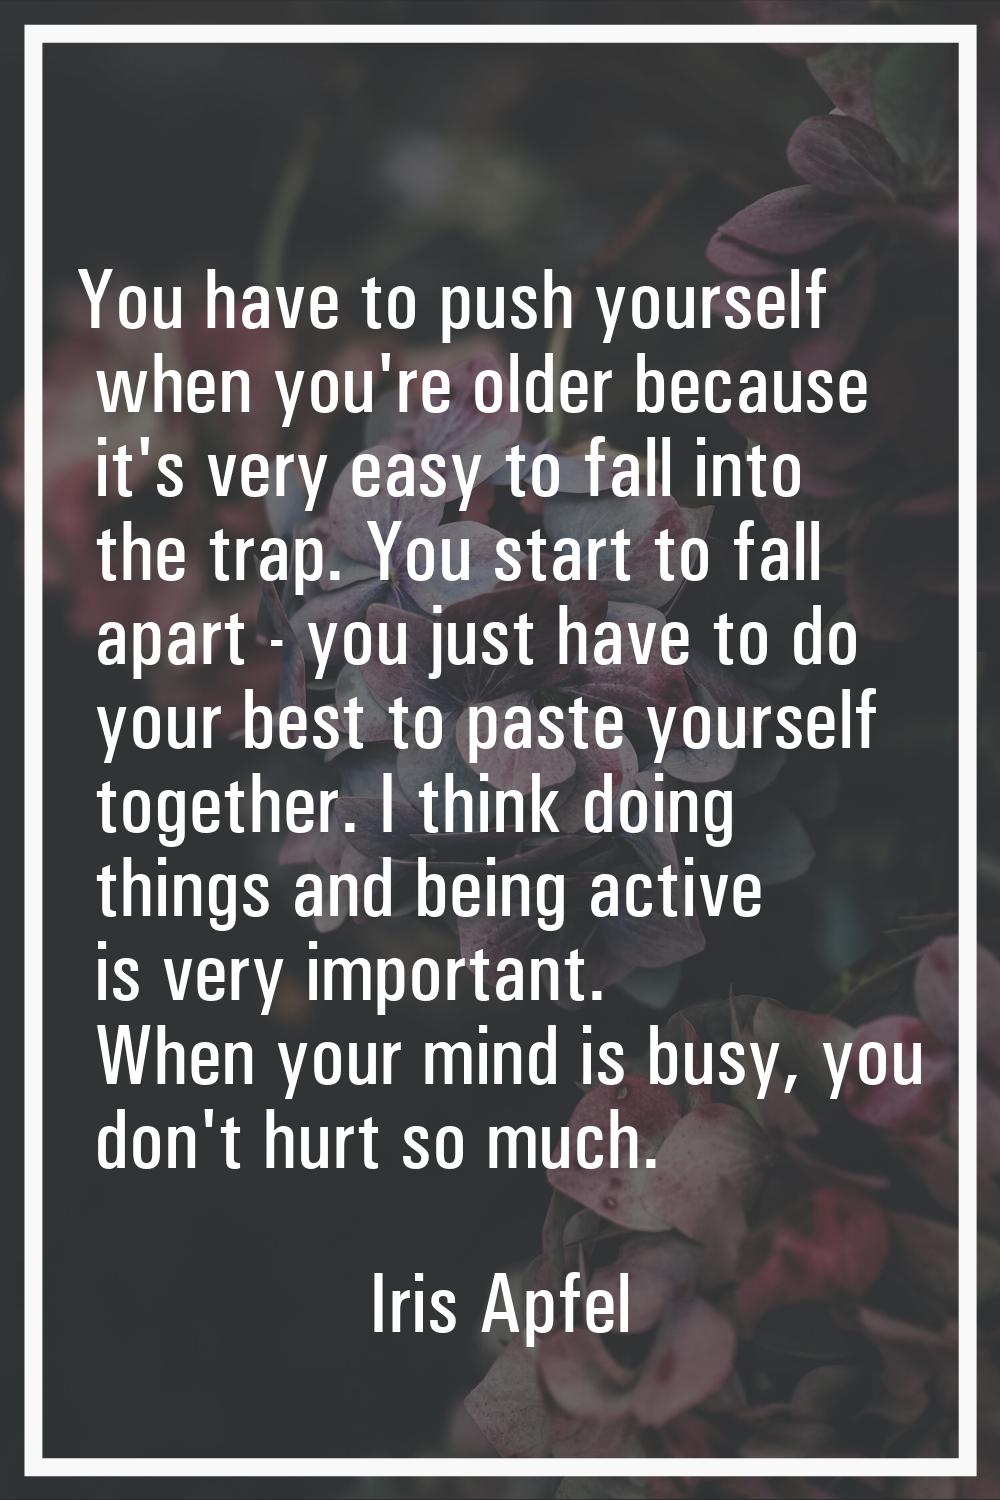 You have to push yourself when you're older because it's very easy to fall into the trap. You start